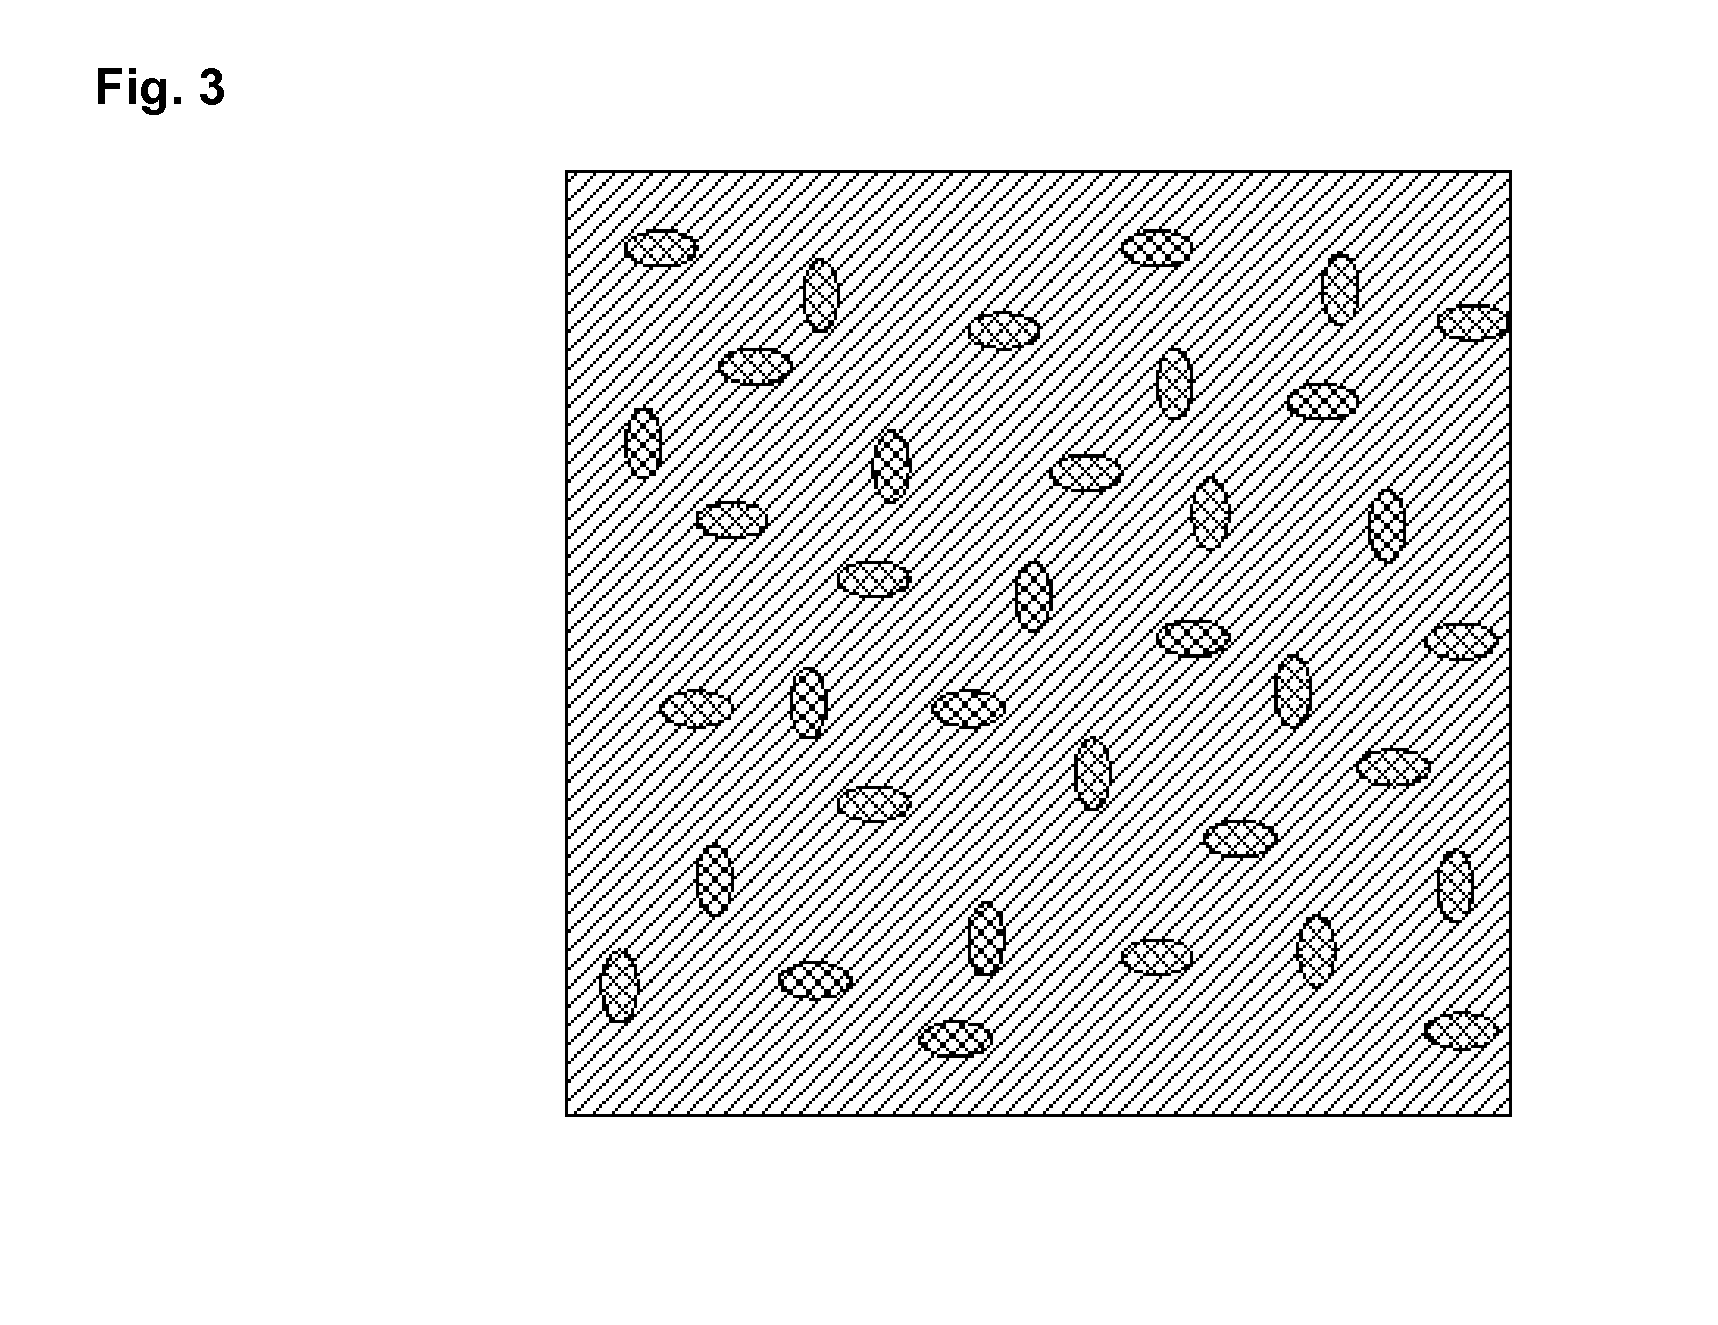 Spatially coded structured light generator